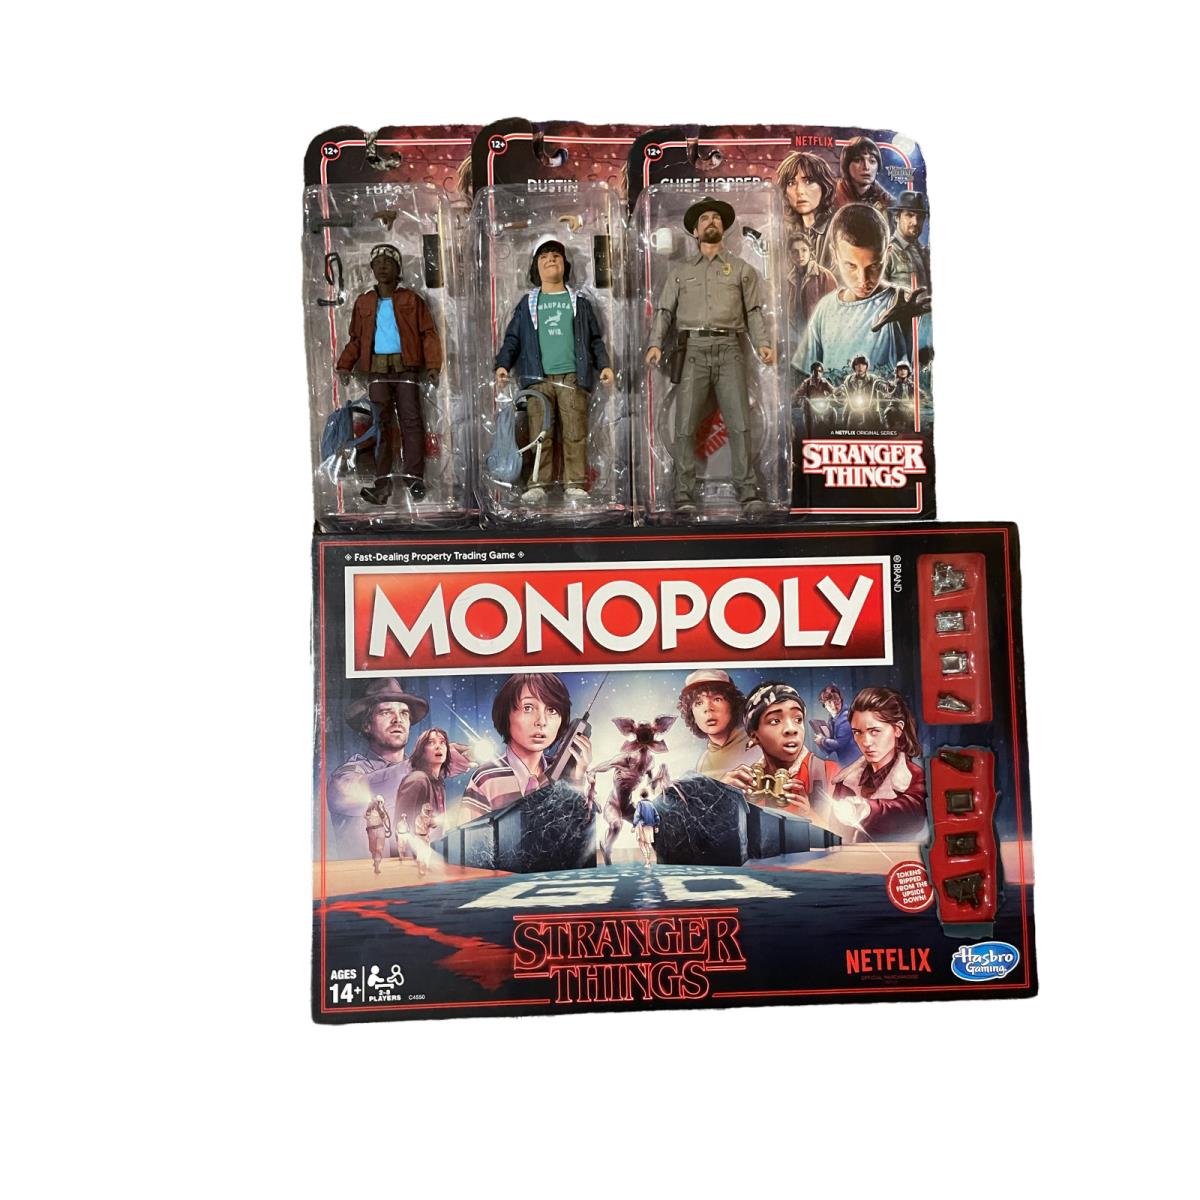 Monopoly Stranger Things Edition Board Game and 3 Action Figures